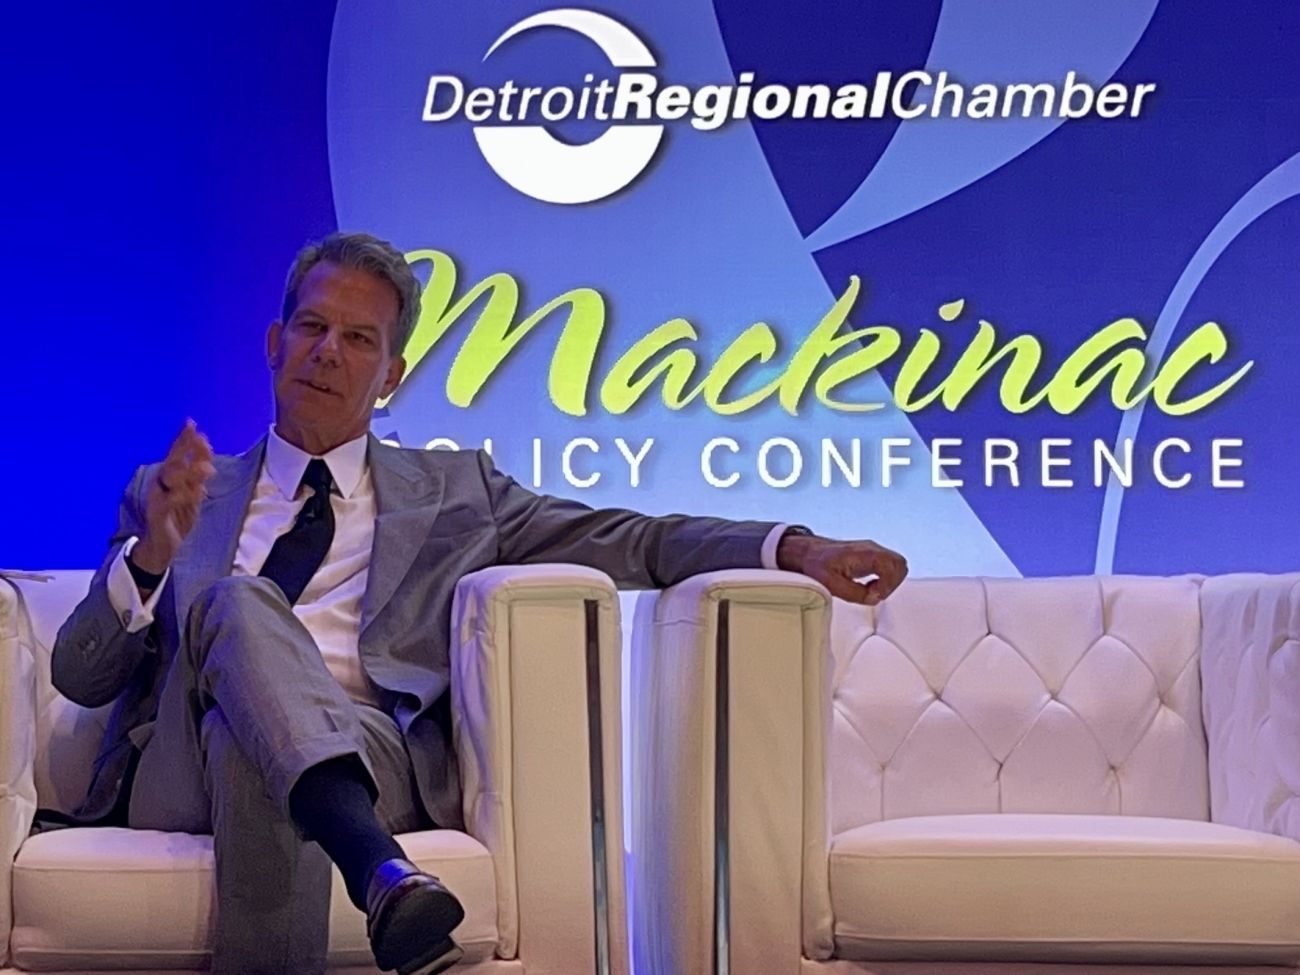 Richard Florida sitting on a couch